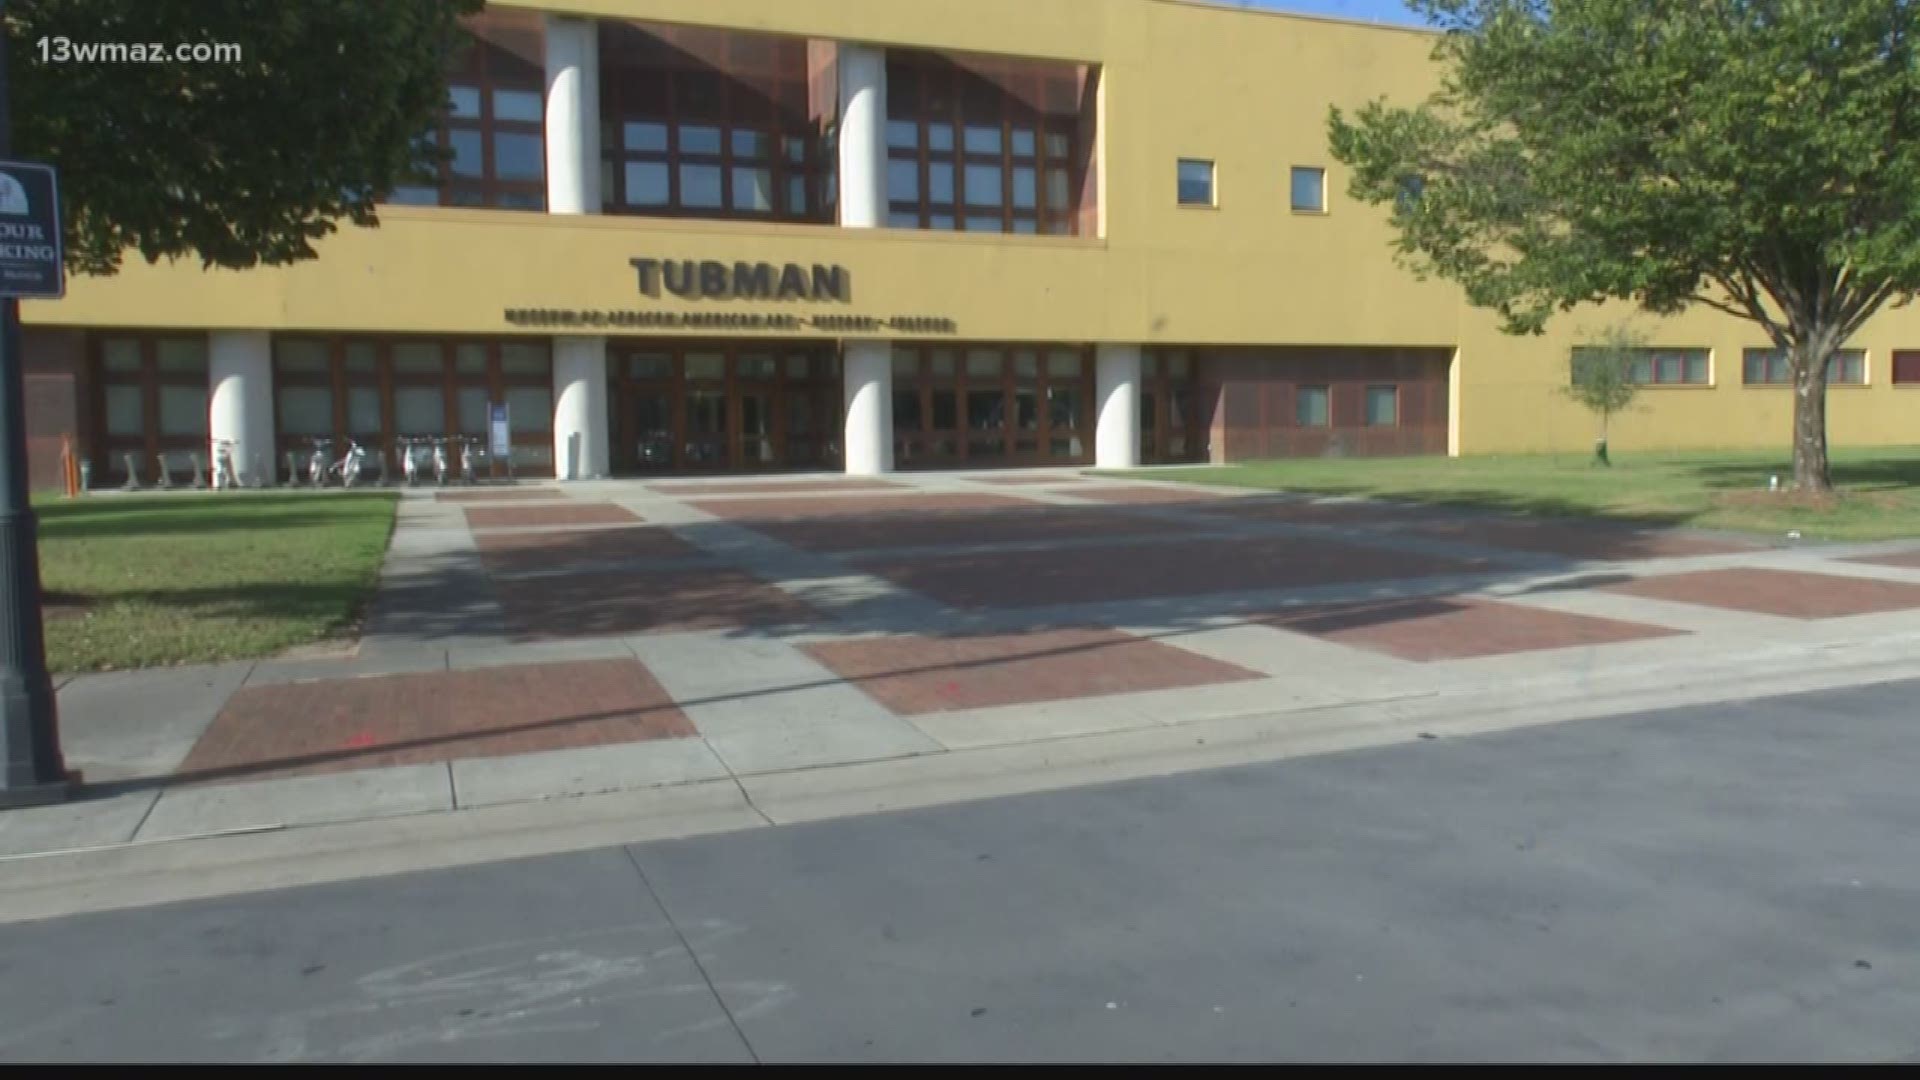 Tubman Museum starts new fundraising campaign after budget cuts